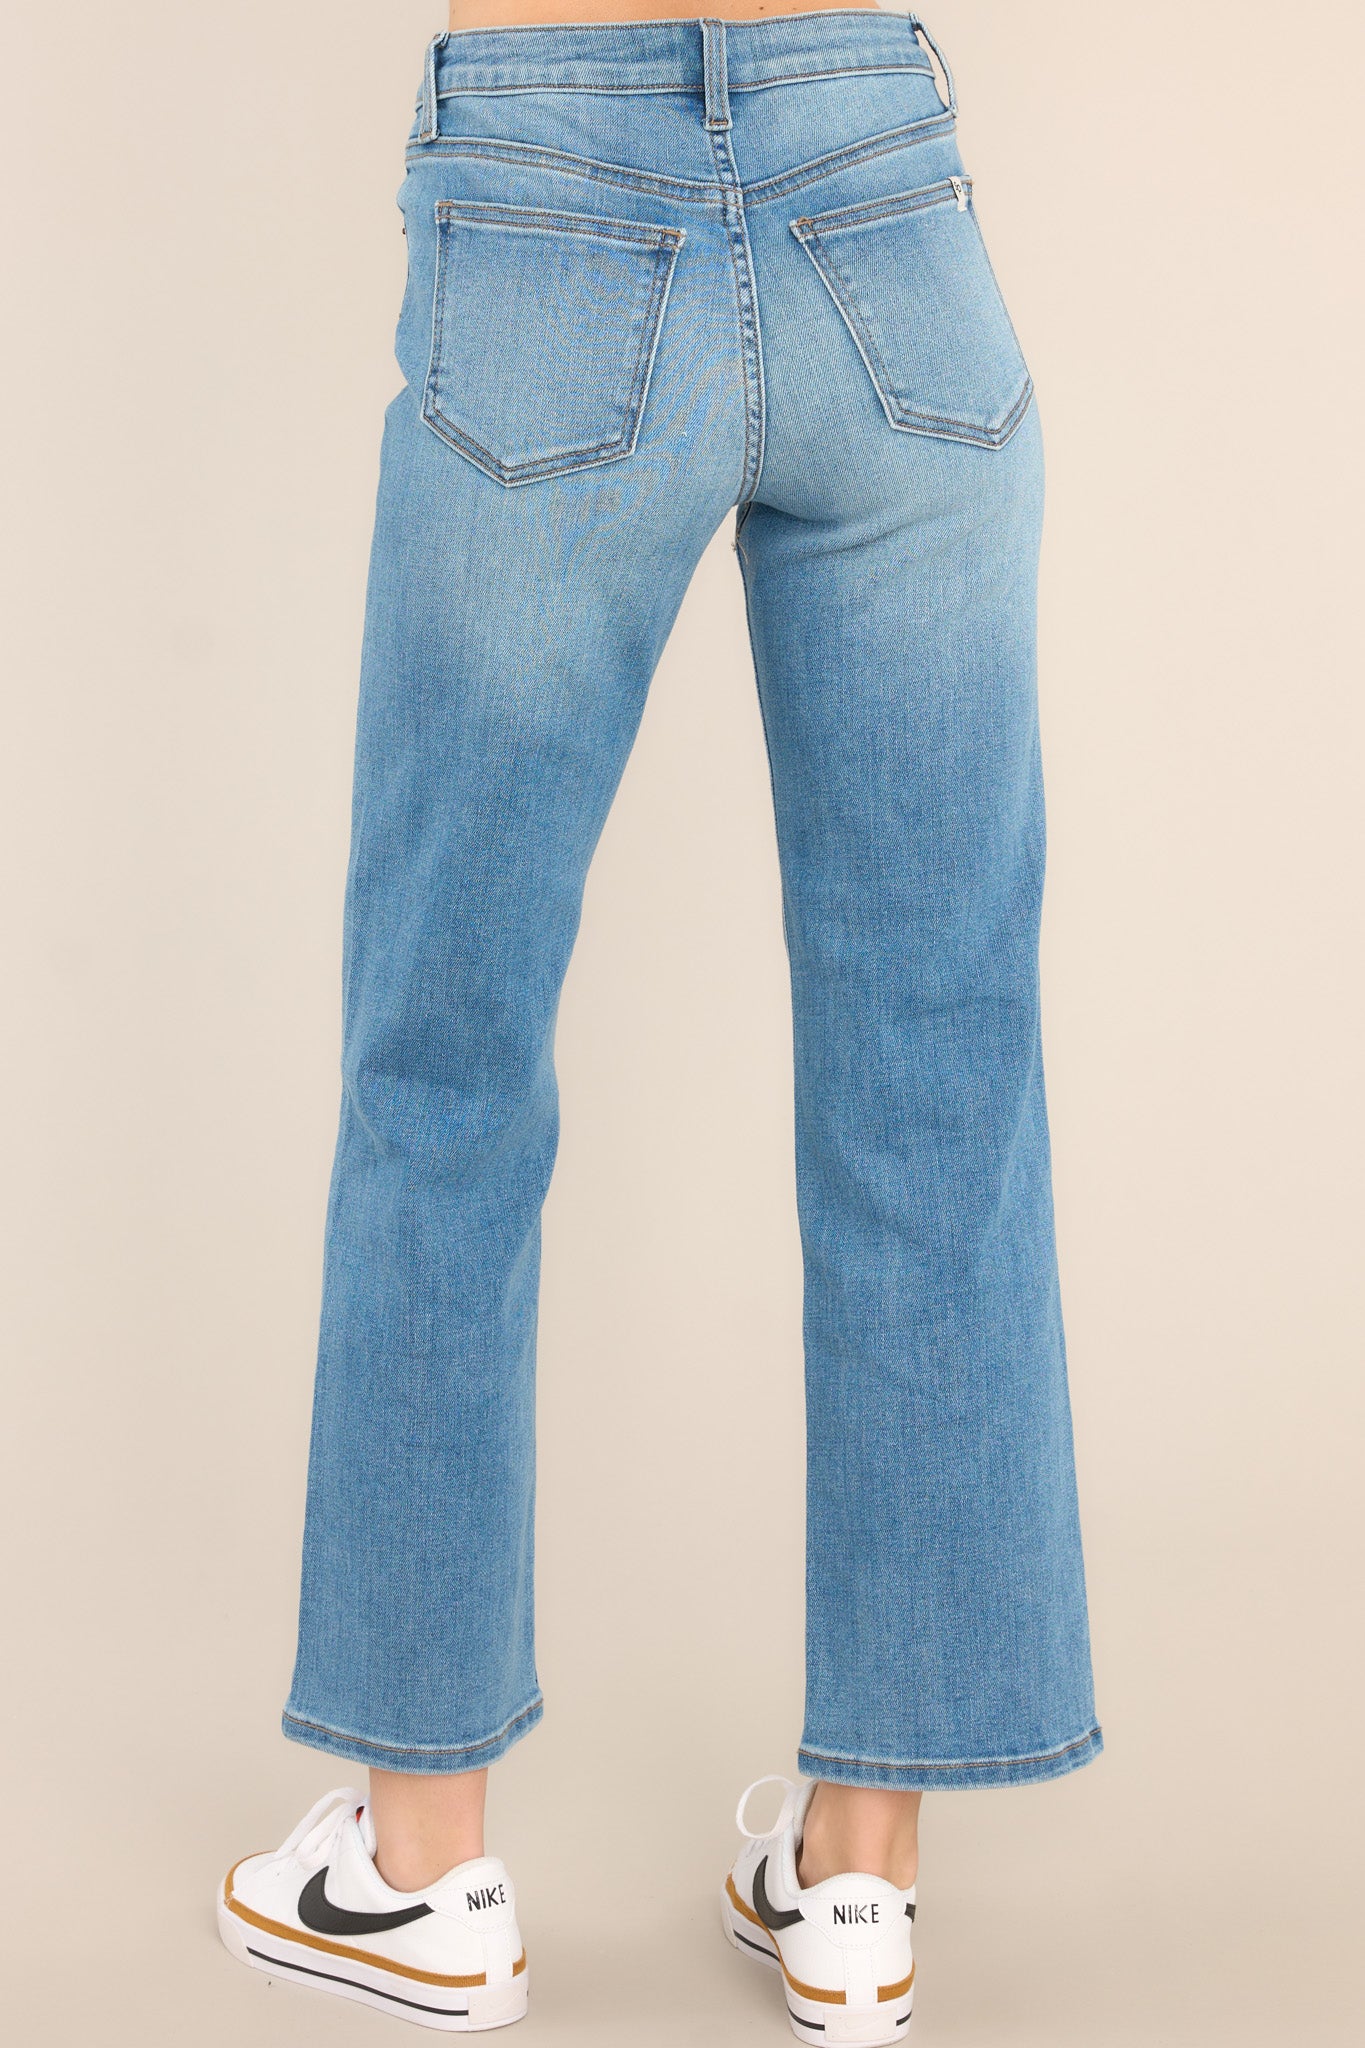 Back view of these jeans that feature a high waist design, a zipper and button closure, functional belt loops and pockets, and a straight leg.